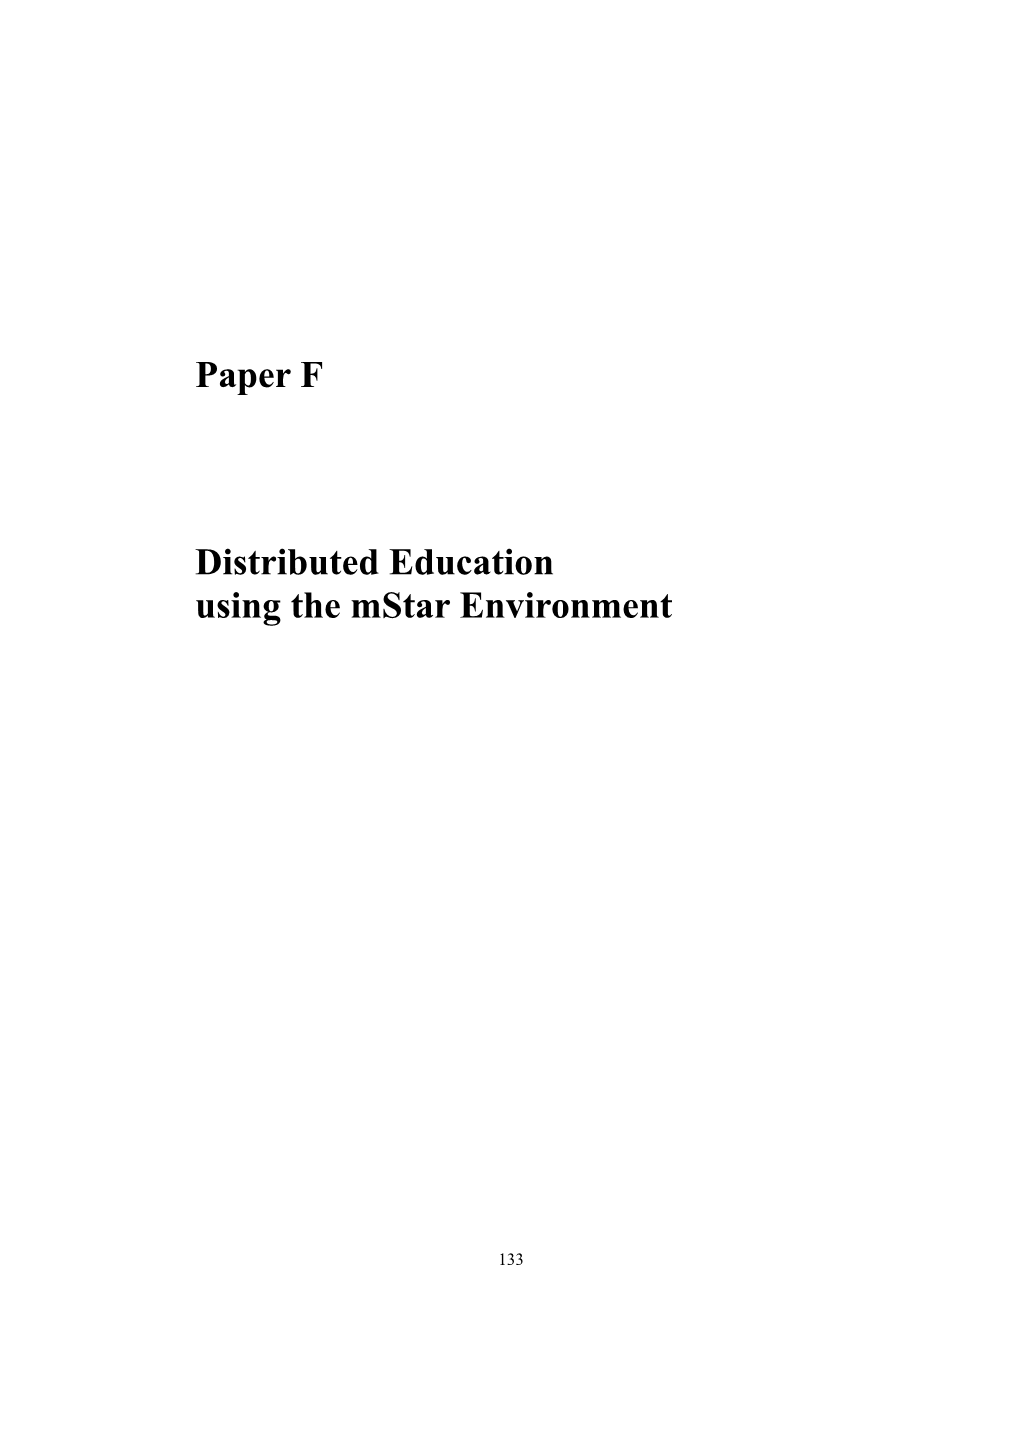 Paper F - Distributed Education Using the Mstar Environment